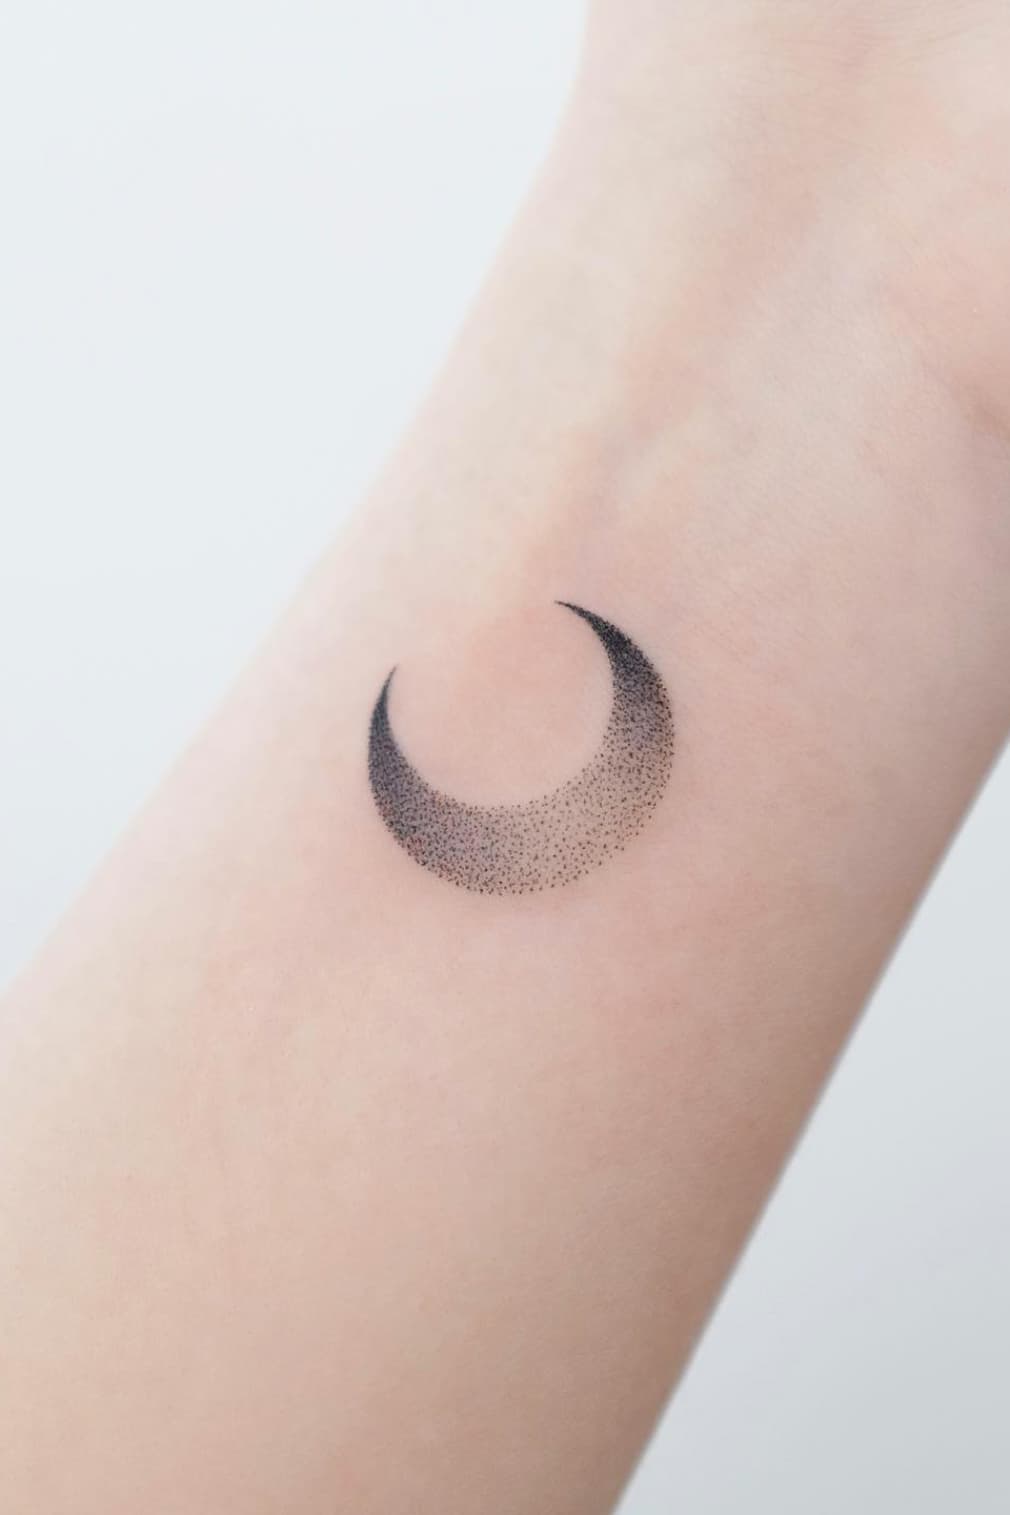 Waxed Crescent Moon Silhouette Tattoo